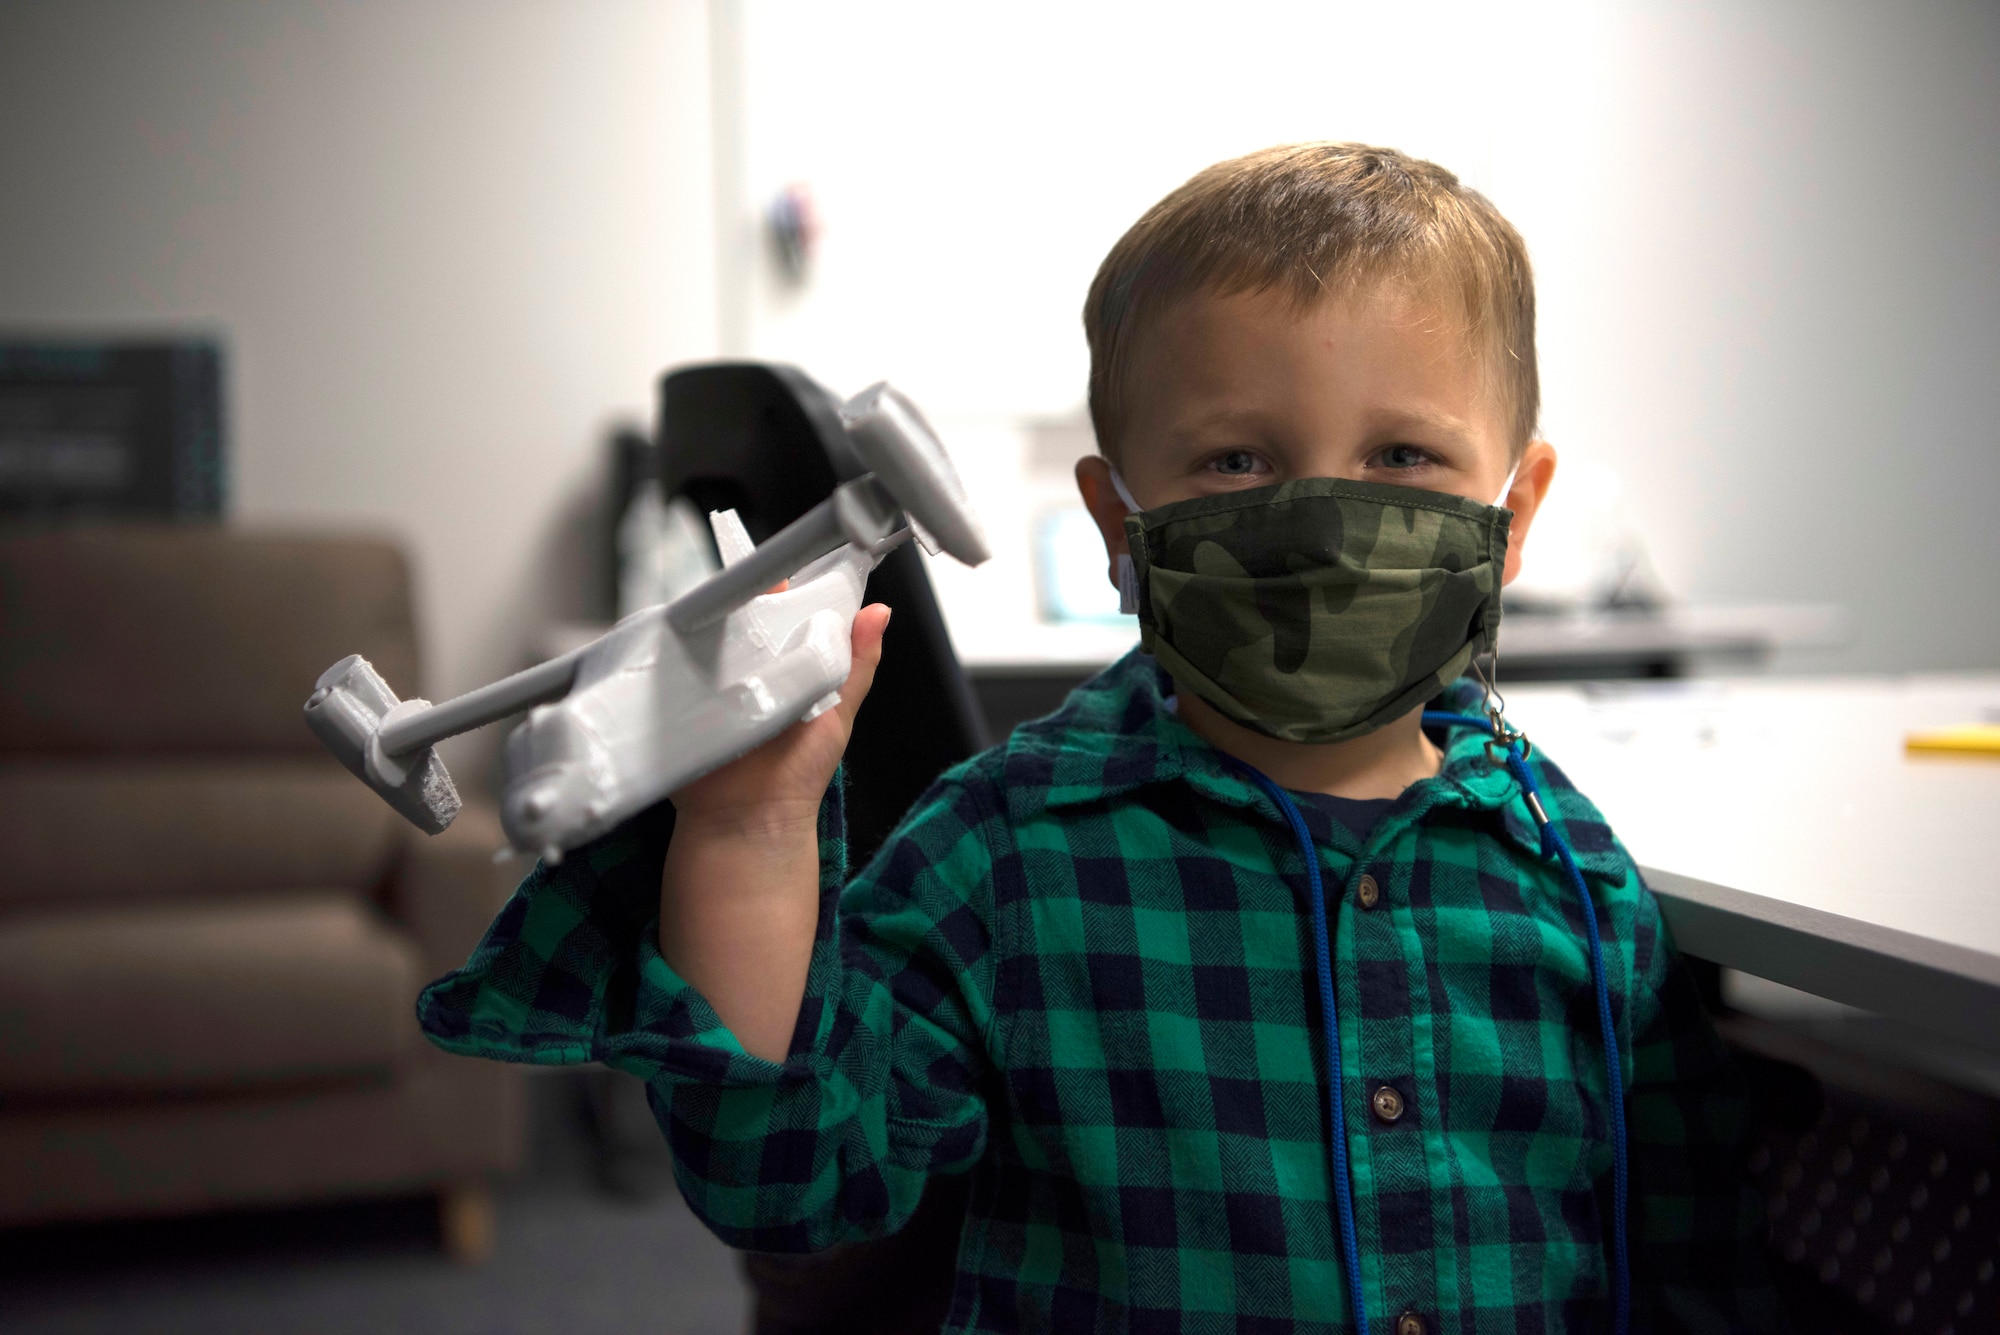 Finley Wilson, son of Master Sgt. Daniel Wilson, 5th Air Force intelligence, surveillance, reconnaissance and cyber effects operations superintendent, plays with a 3D print of a CV-22 Osprey in the newly-opened innovation lab at Yokota Air Base, Japan, Sept. 25, 2020. The lab is a dedicated space filled with tools and resources to collaboratively solve problems. (U.S. Air Force photo by Staff Sgt. Taylor A. Workman)